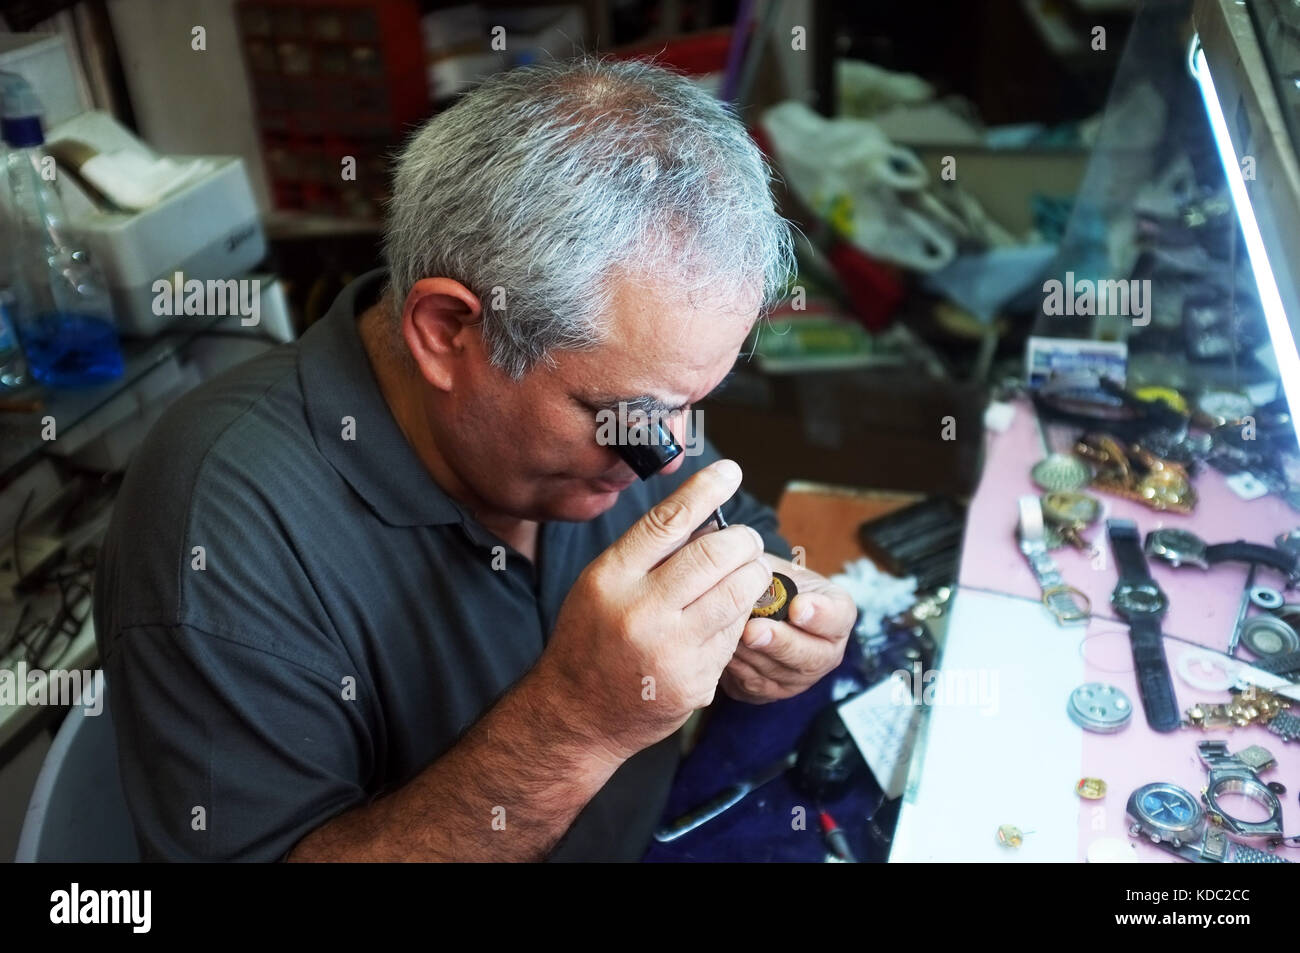 Edremit, Turkey - August 21, 2017: Traditional watchmaker repairs a watch with magnifier in Edremit, Turkey. Stock Photo